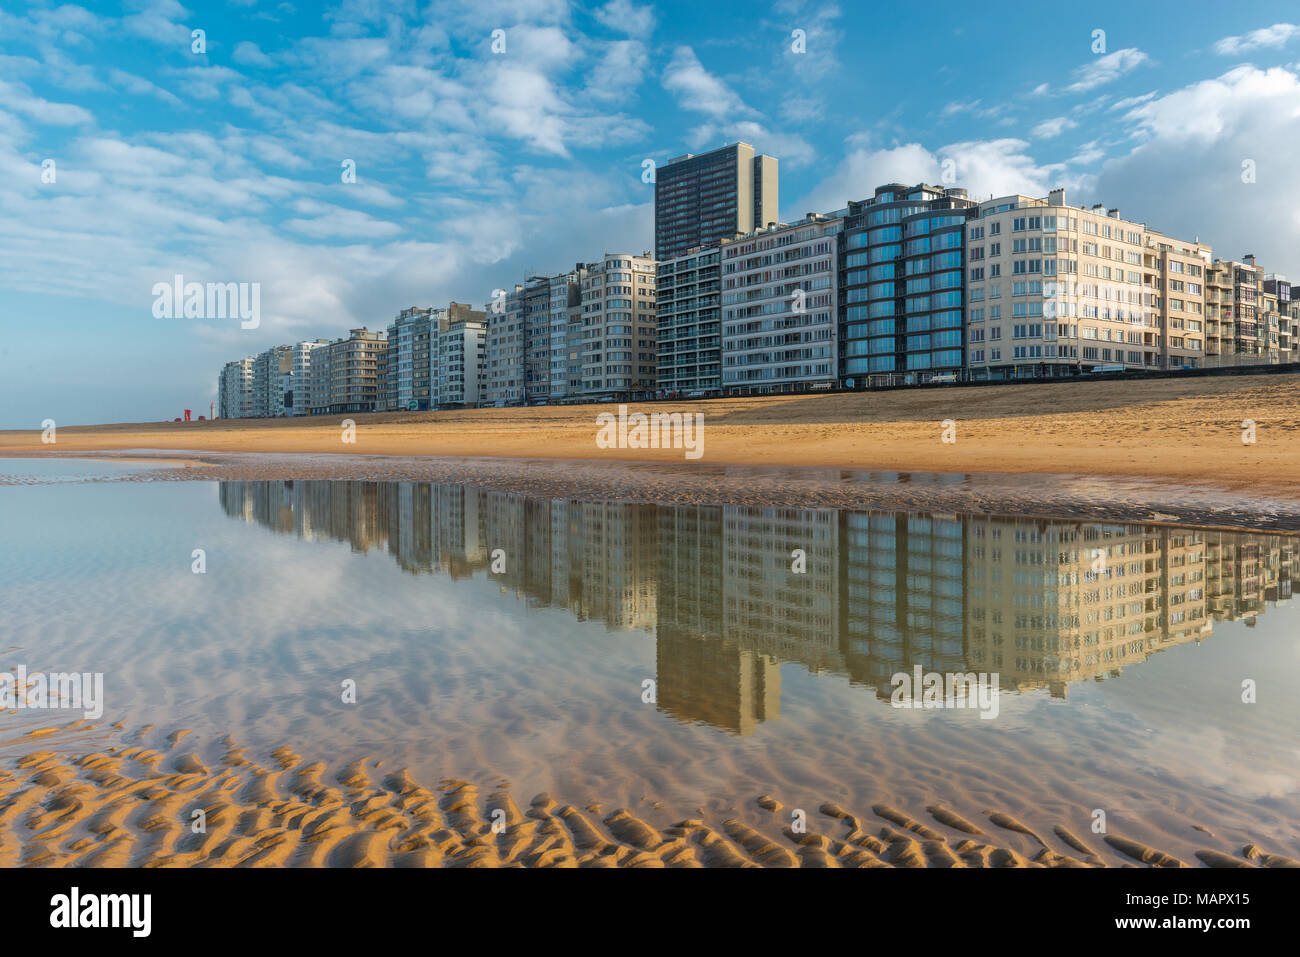 Reflection of the urban skyline of Ostend by its North Sea beach with a view over the waterfront promenade at sunset, West Flanders, Belgium. Stock Photo